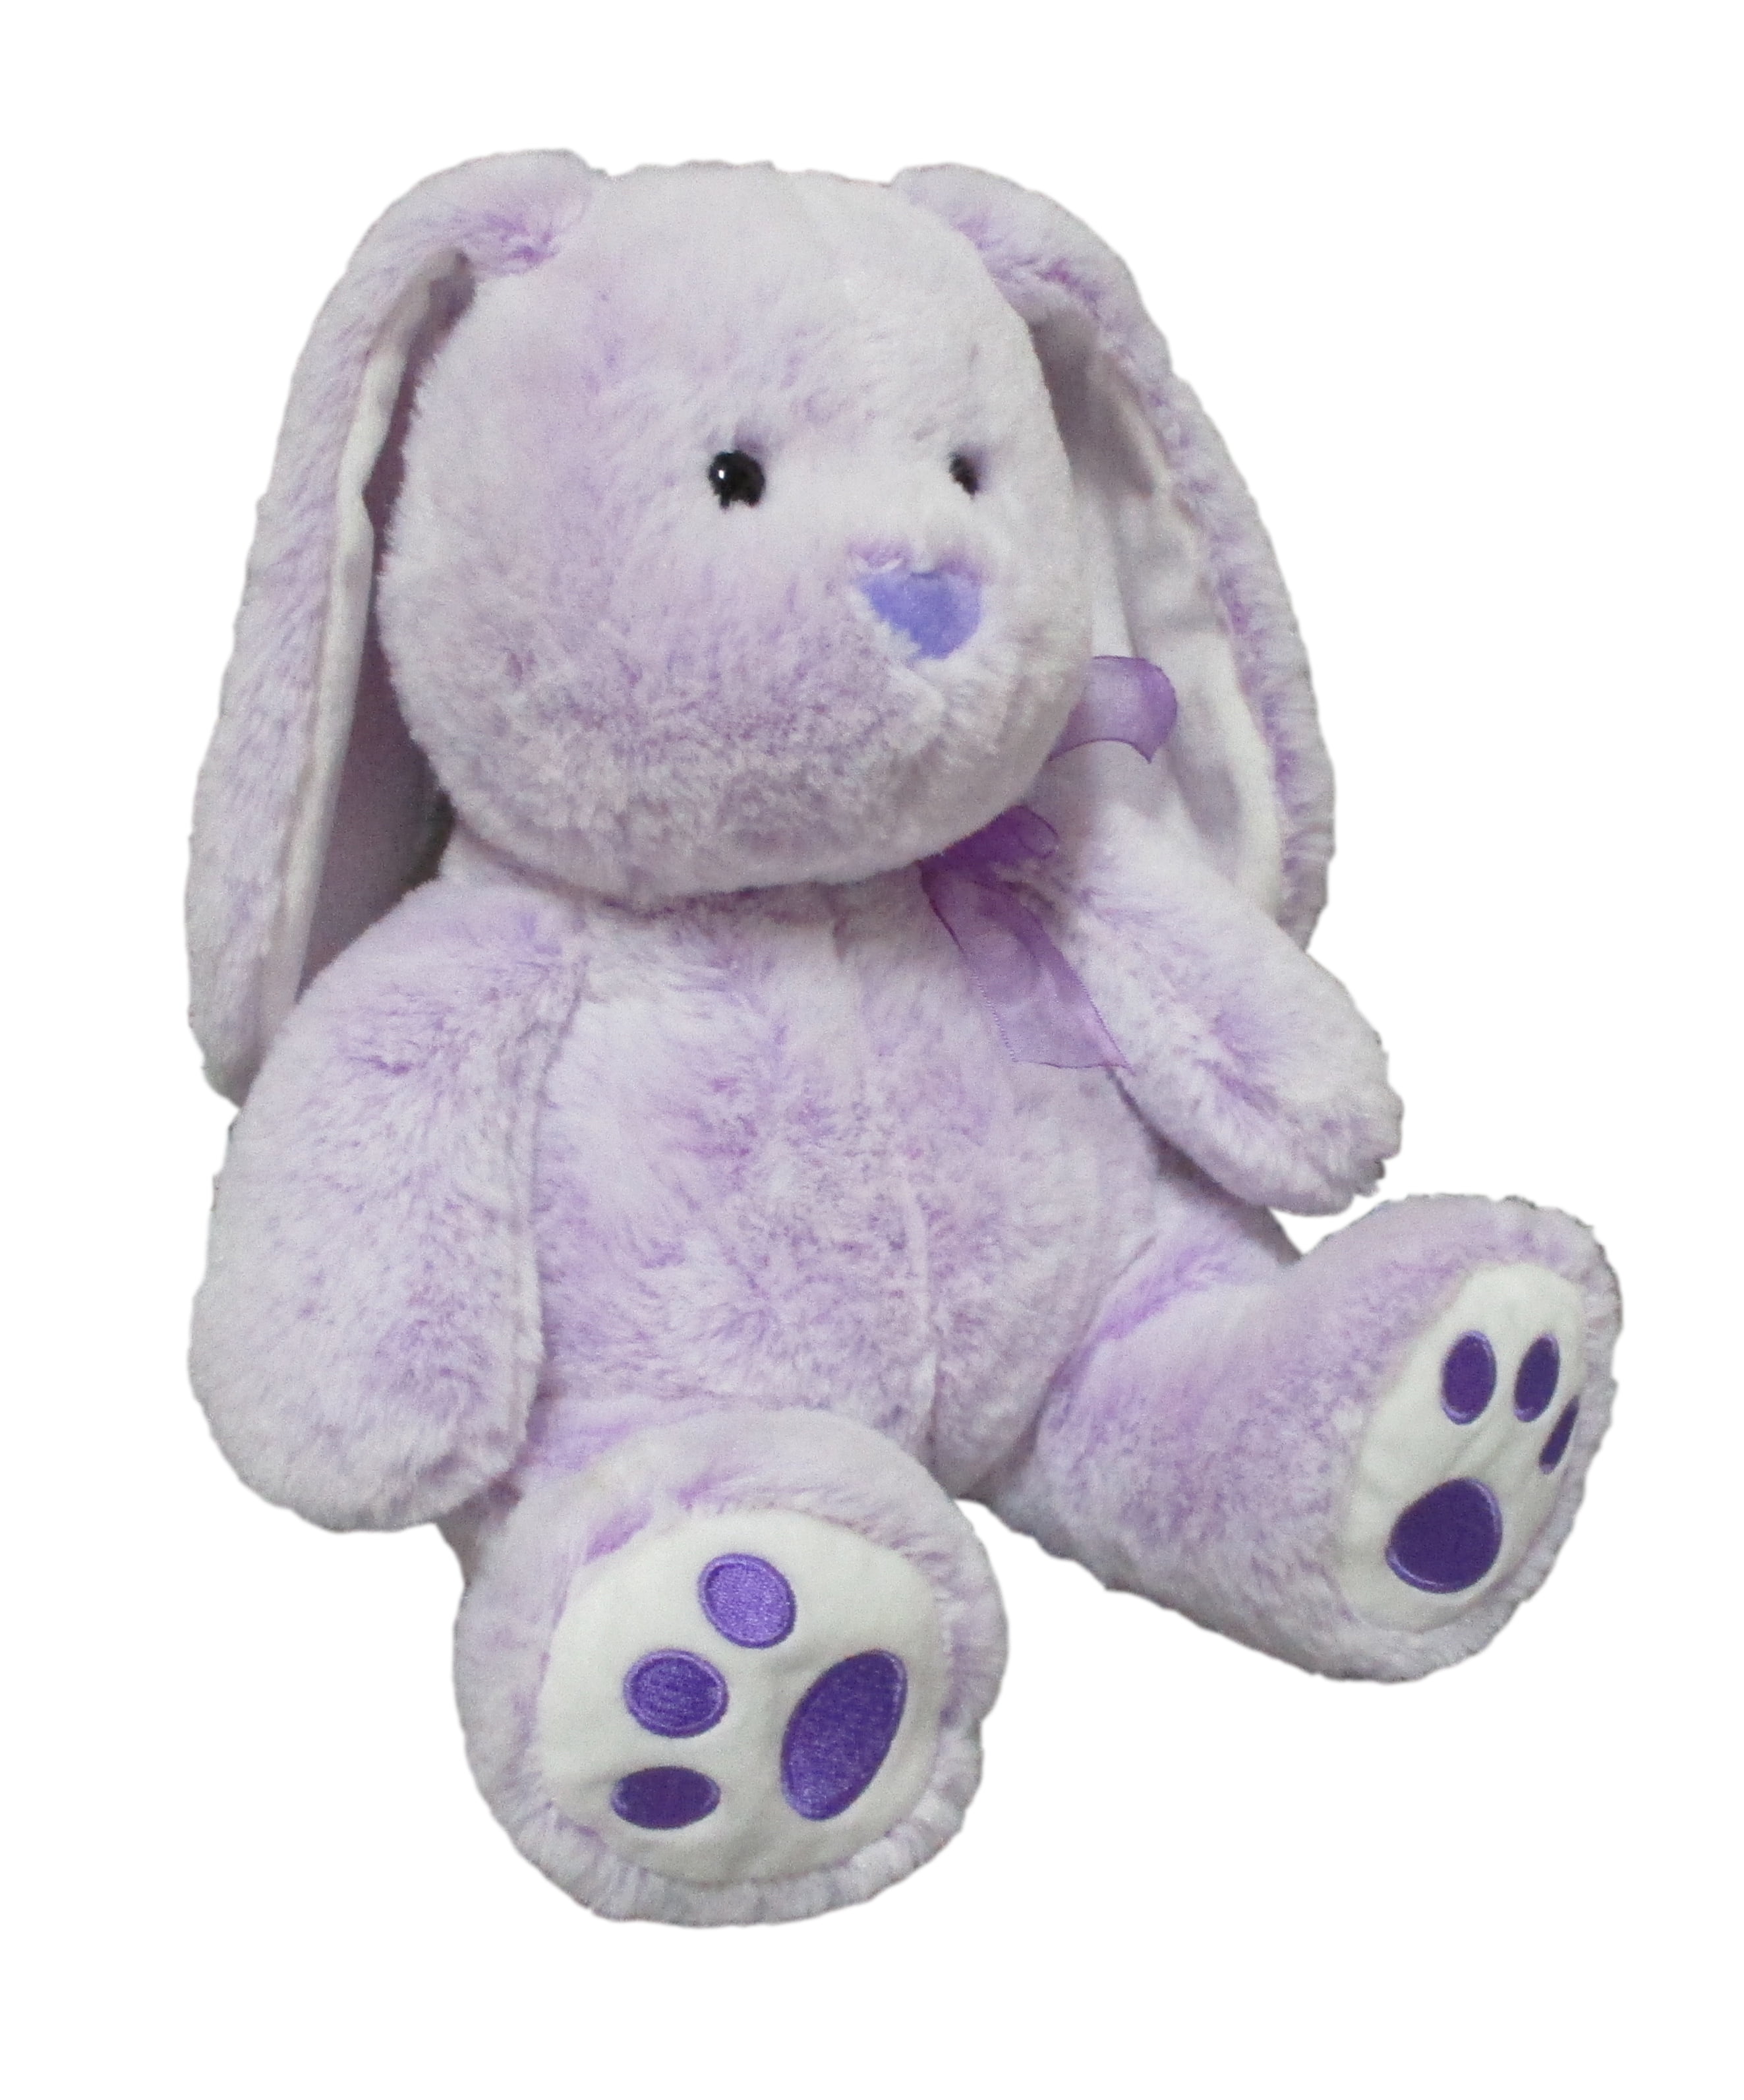 Details about   Way To Celebrate Easter Bunny Rabbit 13" Purple Soft Stuffed Plush Animal 